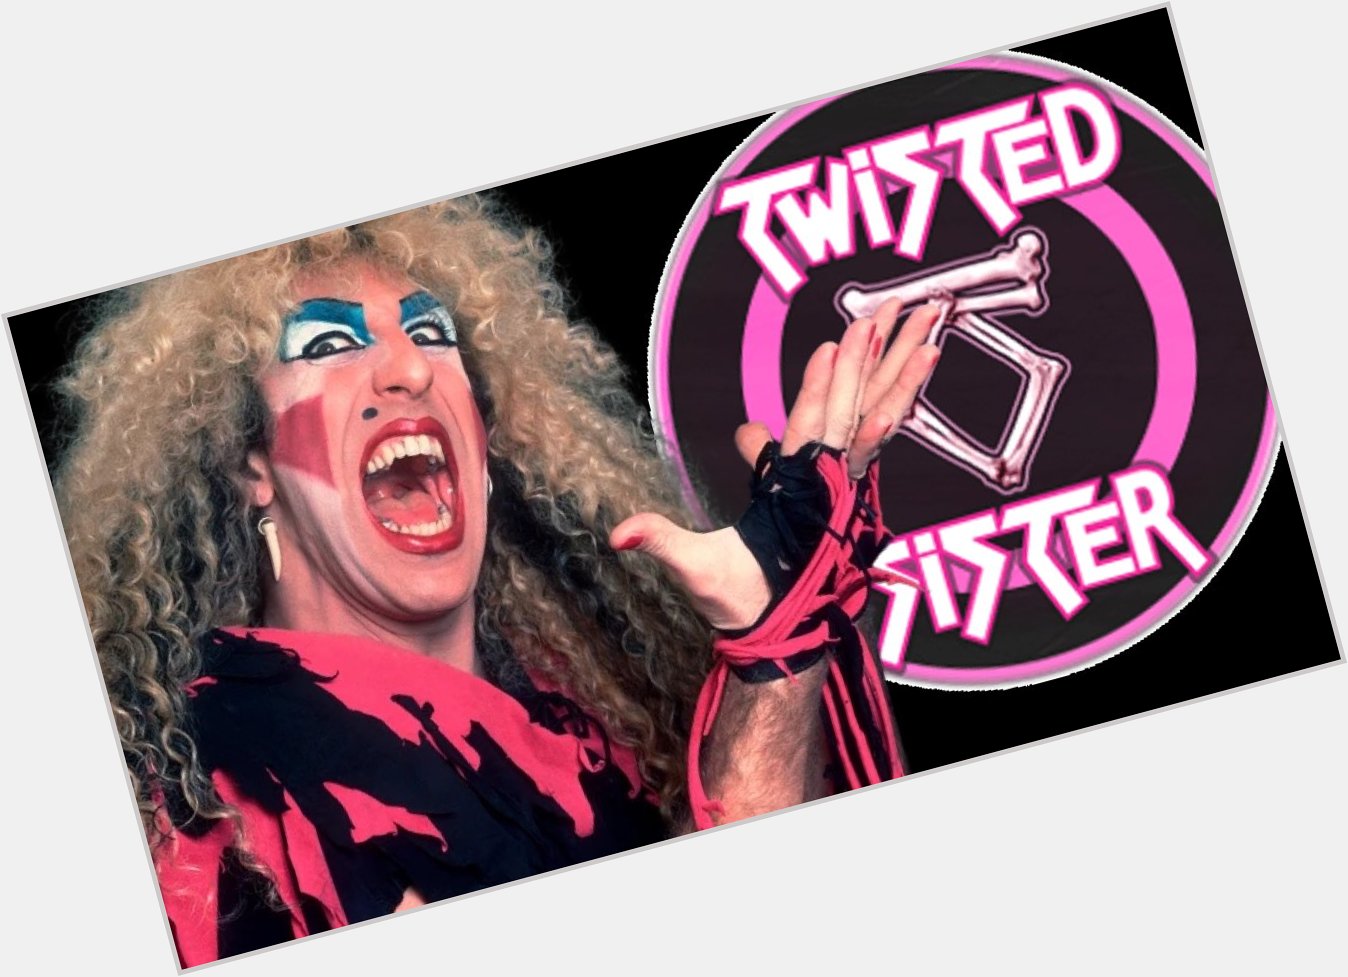 Happy Birthday Dee Snider
Lead singer for Twisted Sister
March 15, 1955 New York City 